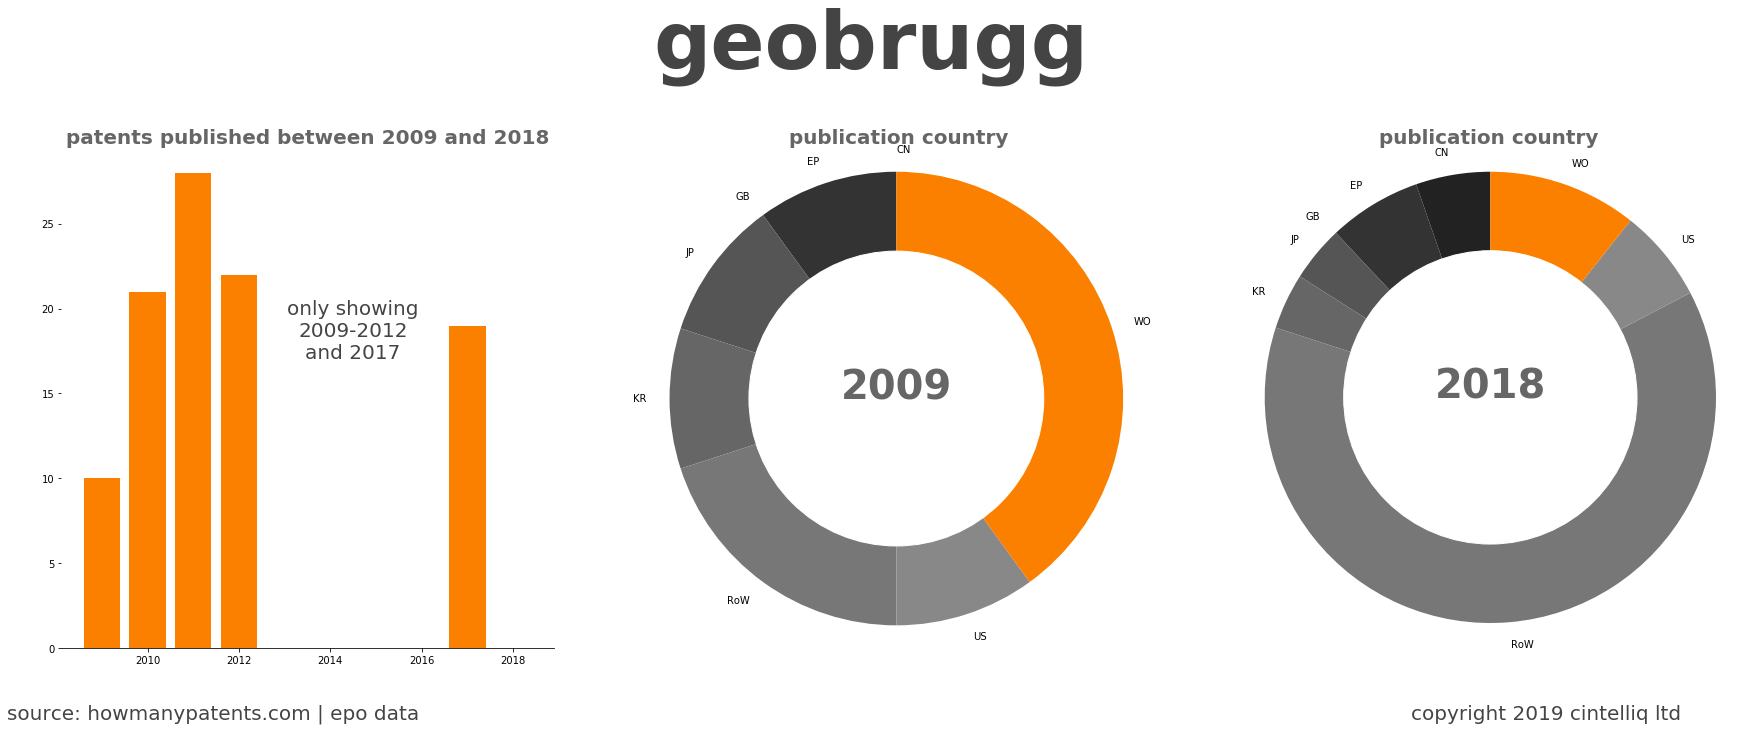 summary of patents for Geobrugg